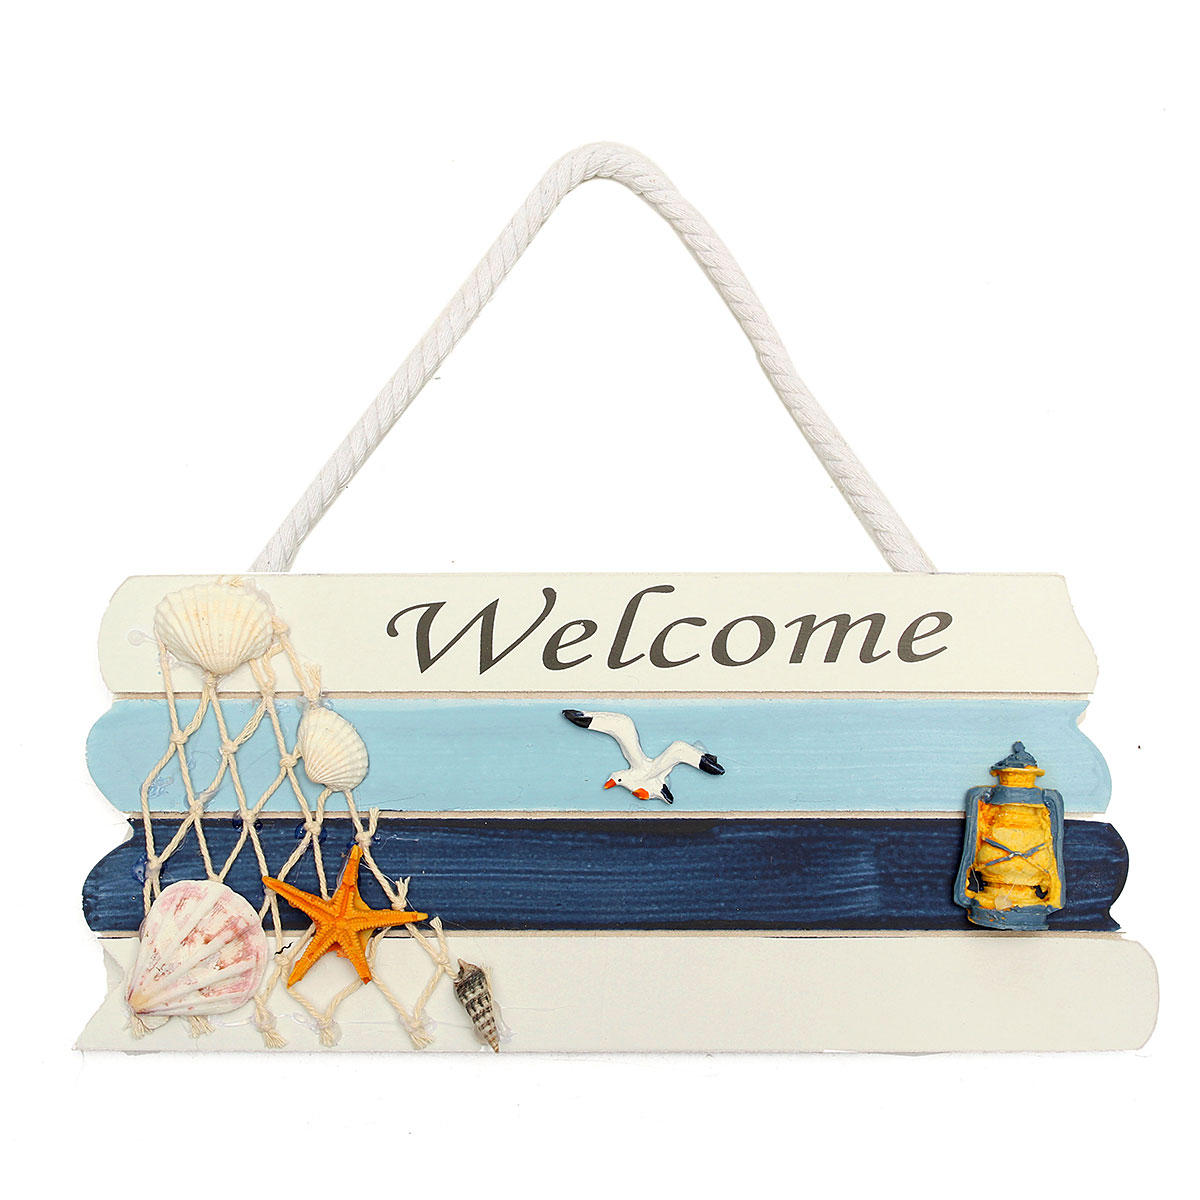 

Nautical Wooden Sign Beach Wall Welcome Sign Plaque Home Room Hanging Decor Decorations